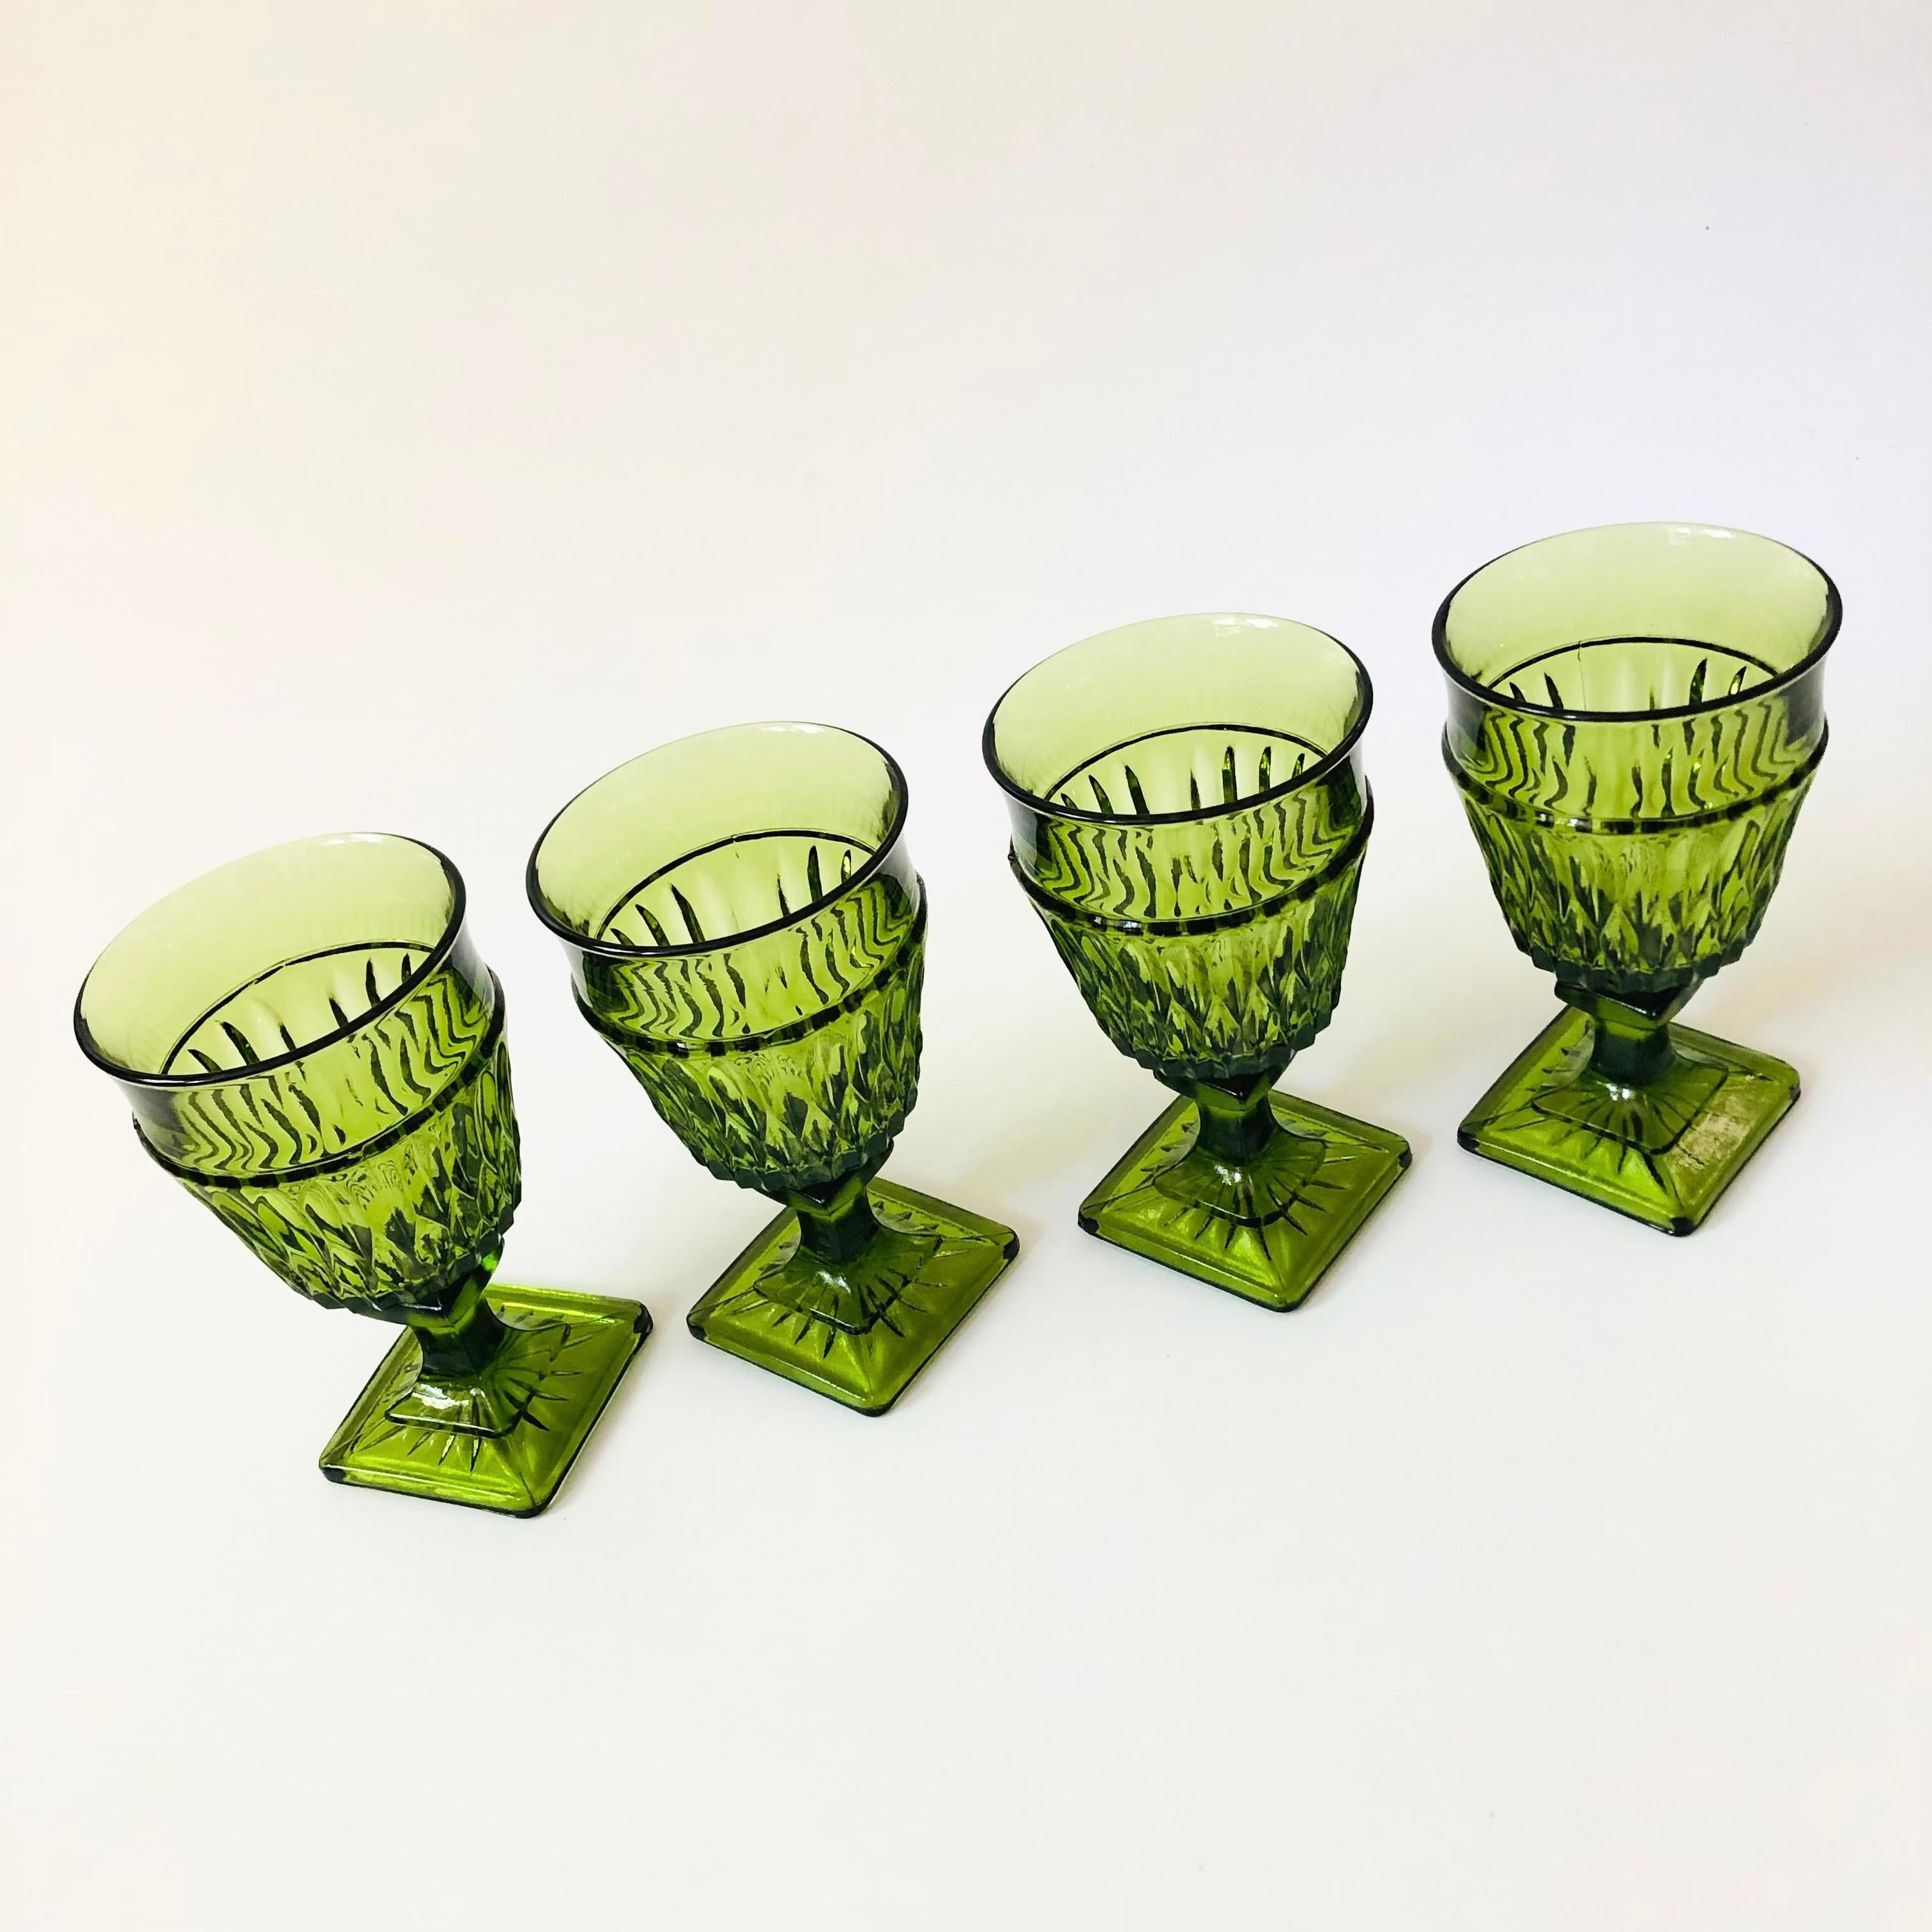 A set of 4 gorgeous wine goblets with a lovely ornate design in green glass. Made in the 